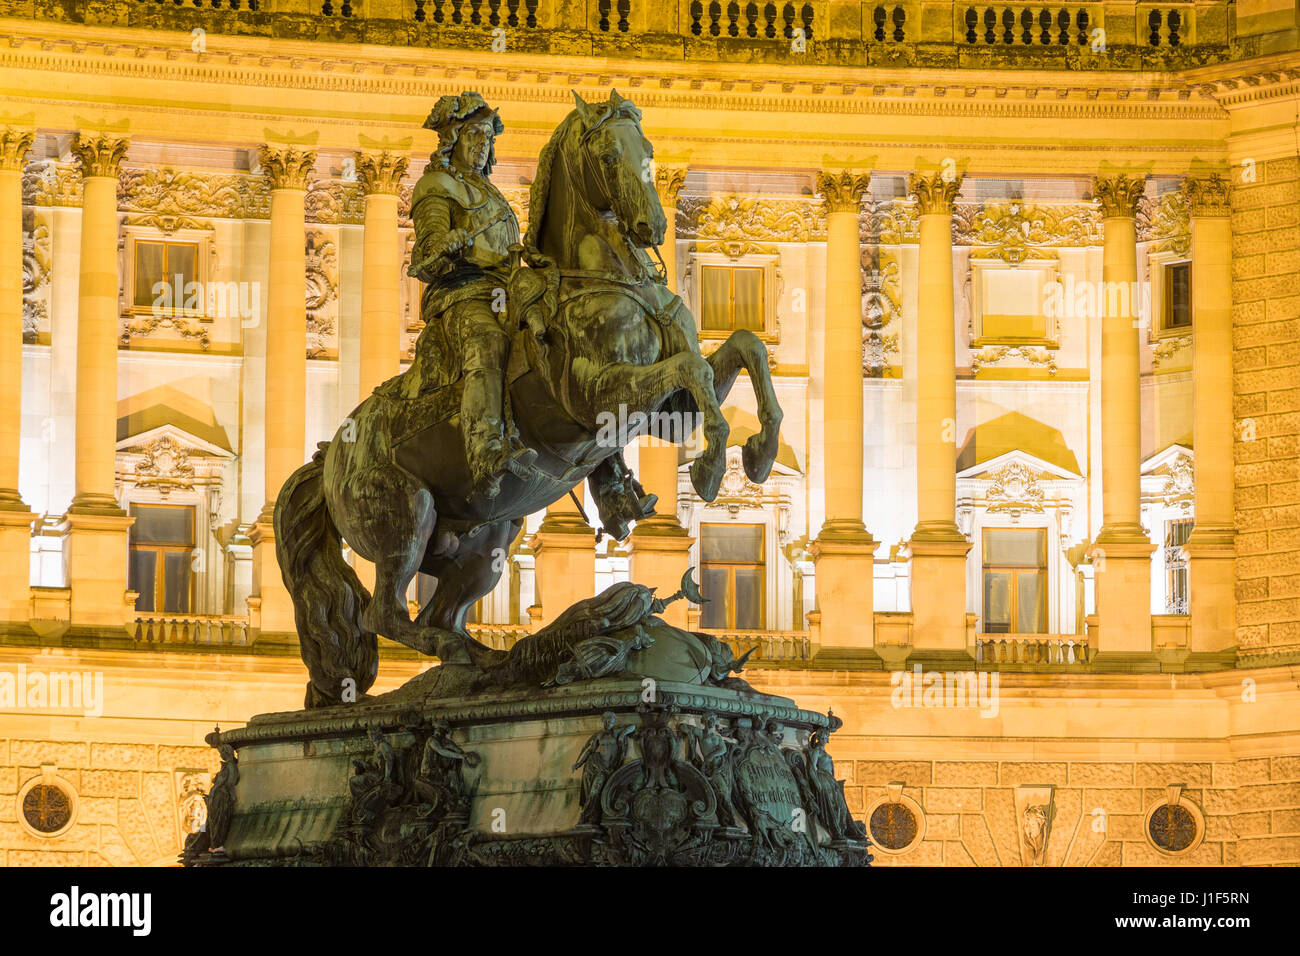 Equestrian sculpture Prinz Eugen in front of Neue Burg, Hofburg Imperial Palace by night, Vienna, Austria Stock Photo